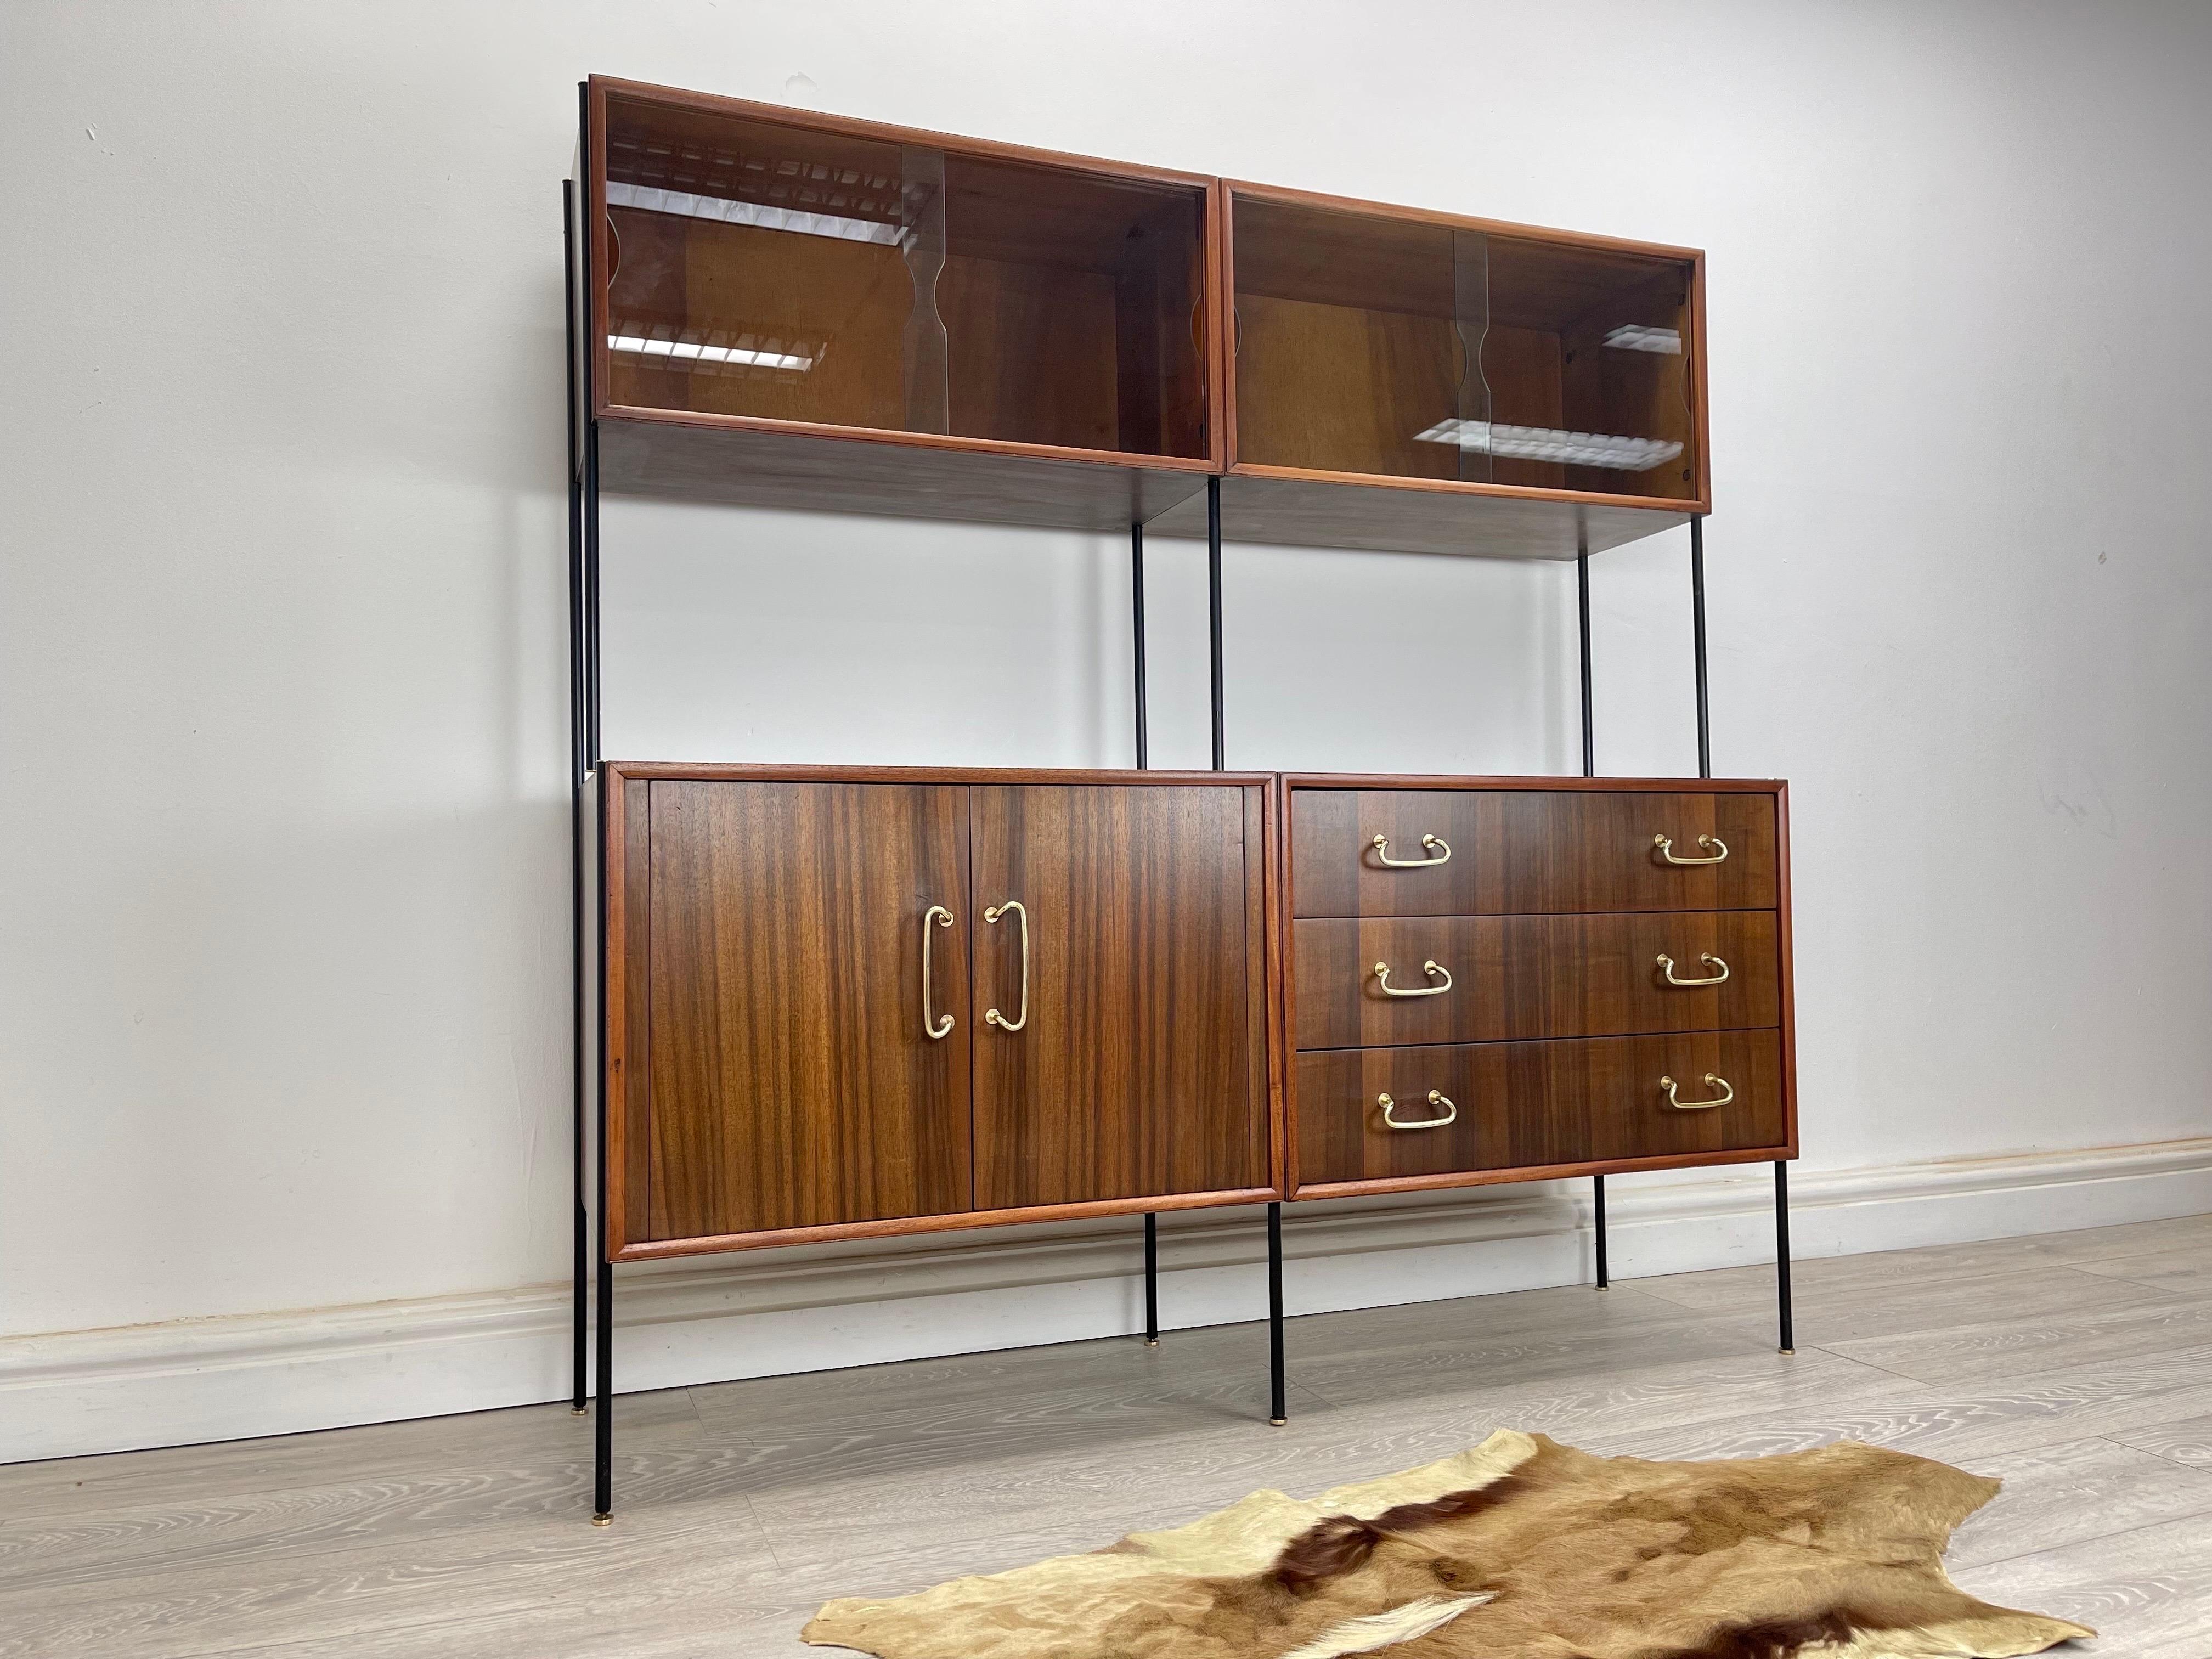 Shelving Unit
Stunning Vintage Walnut shelving system designed by peter Hayward for Vanson furniture cir 1950s . The shelving system stands on satin black metal frame with stunning walnut veneer throughout and brass fittings great quality piece